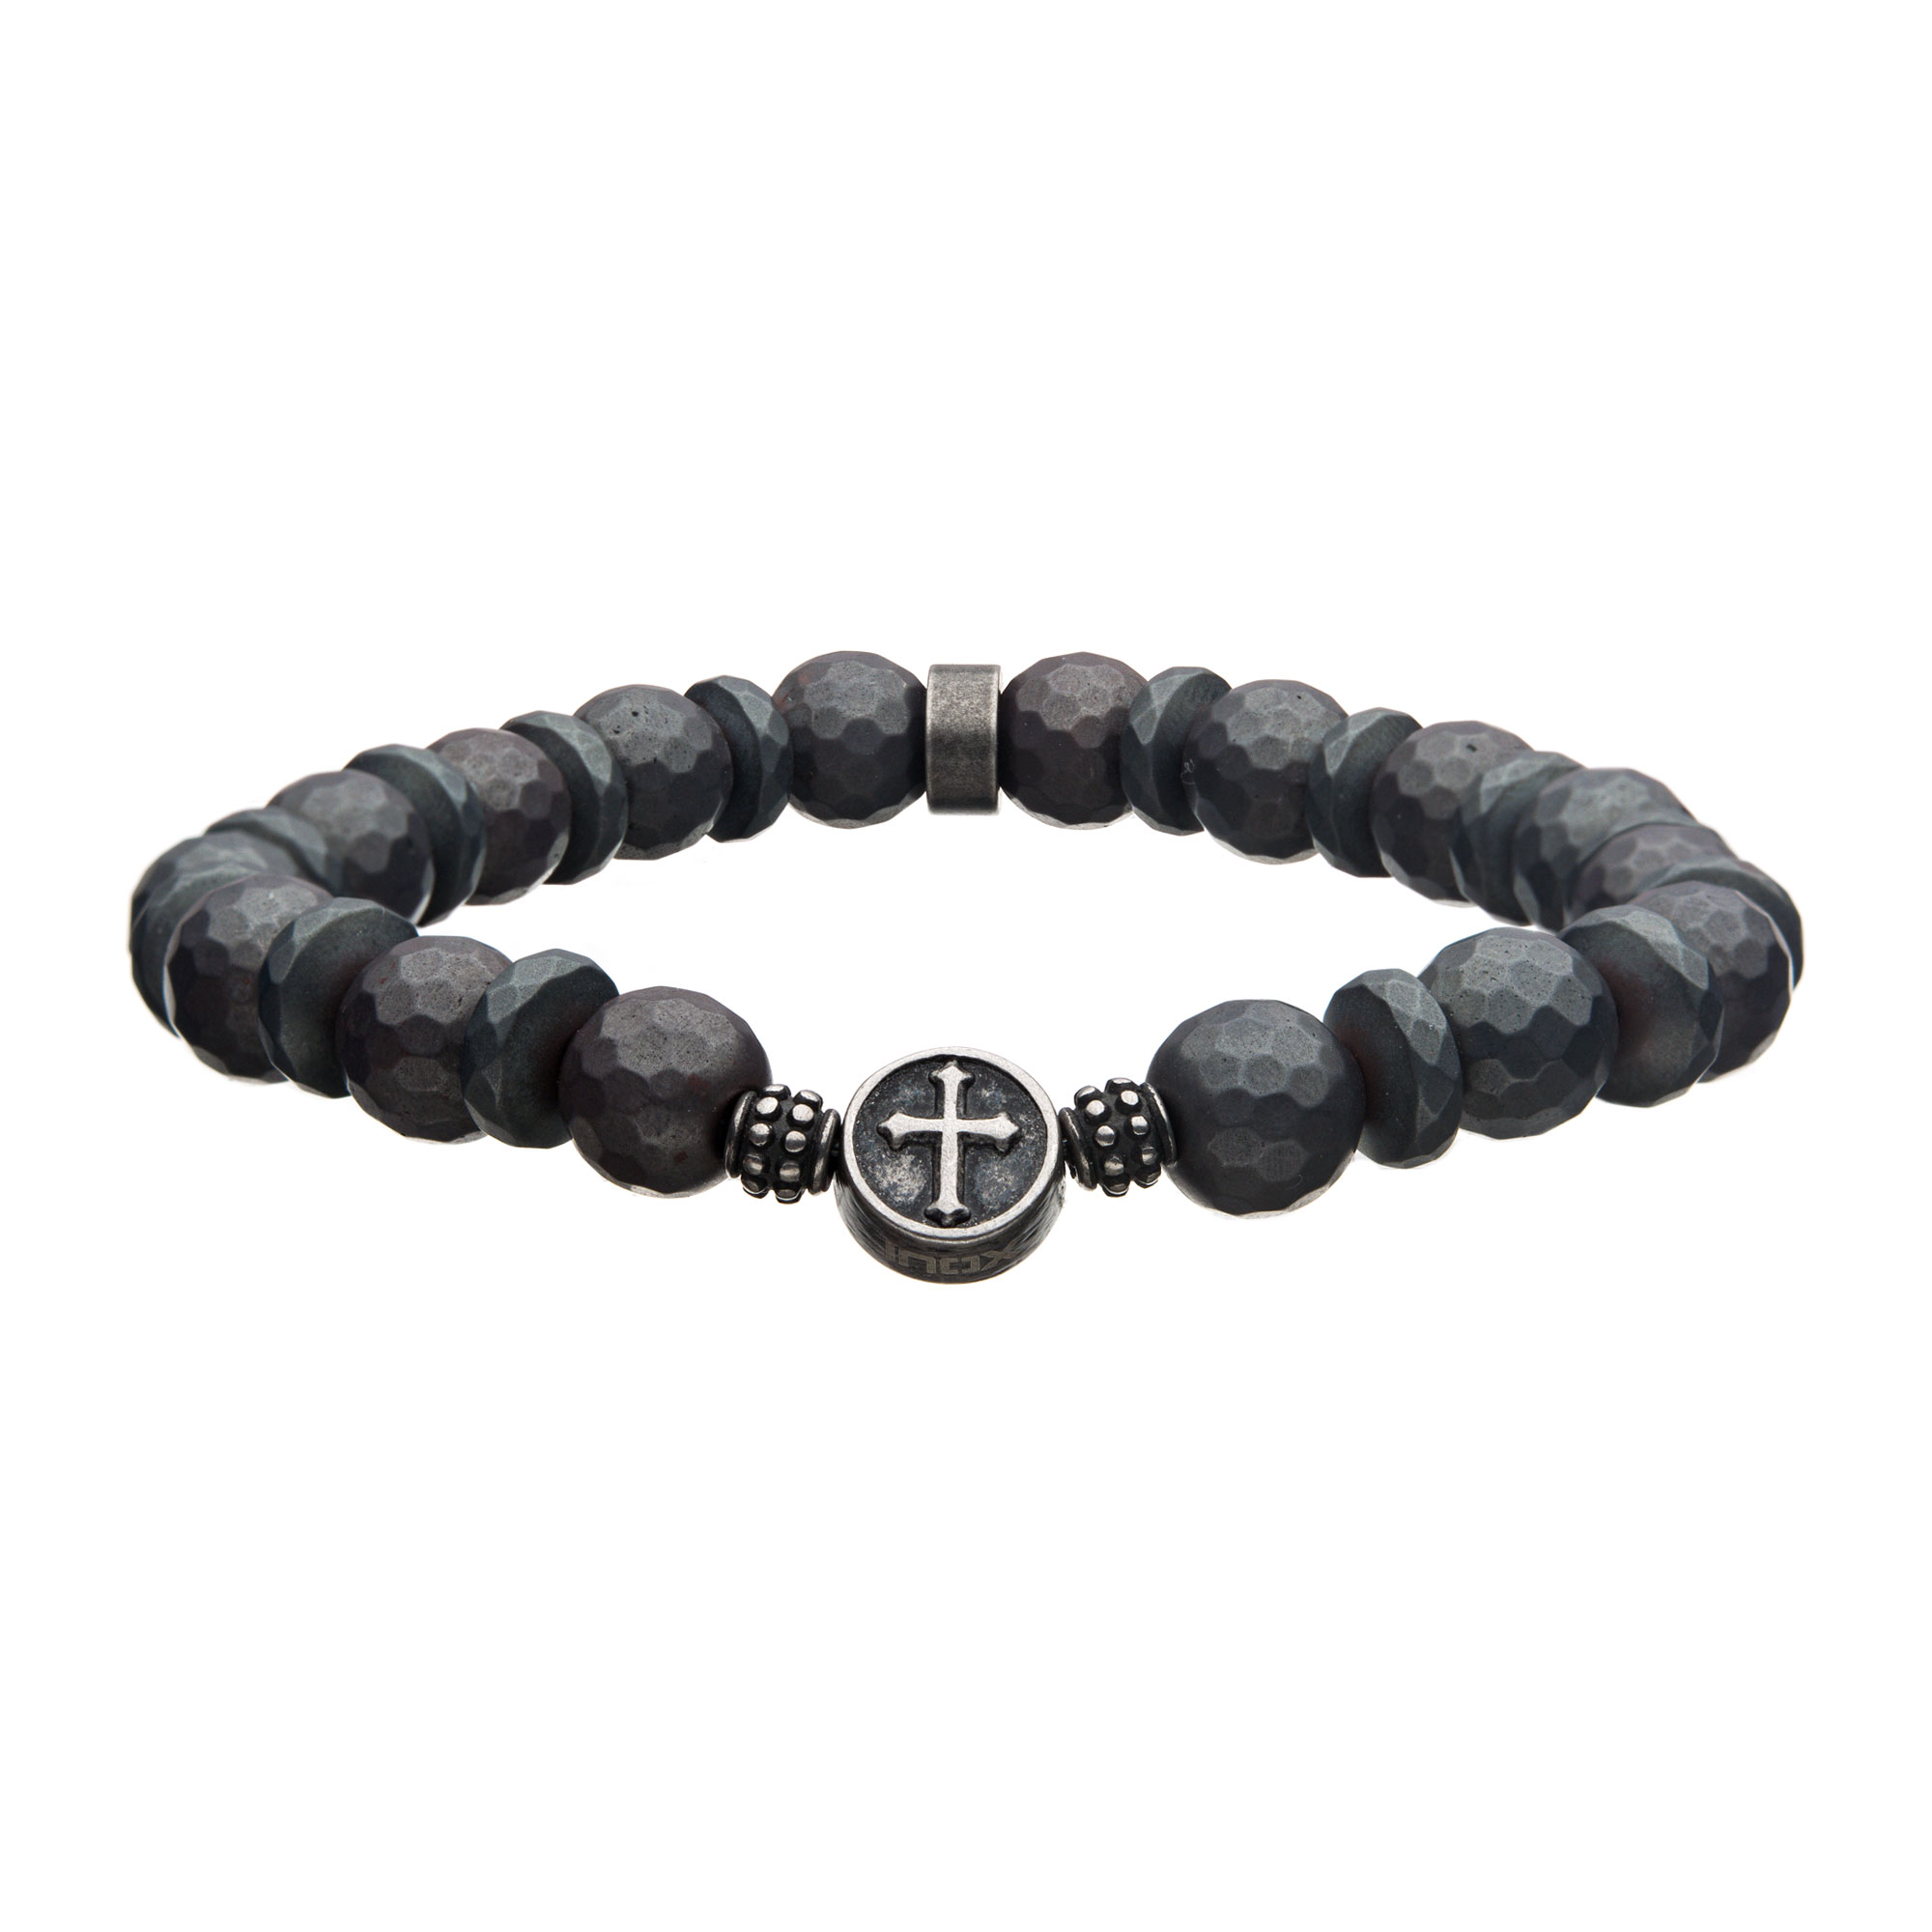 10mm Hematite Stone with Gray Silicone String Bracelet Lee Ann's Fine Jewelry Russellville, AR